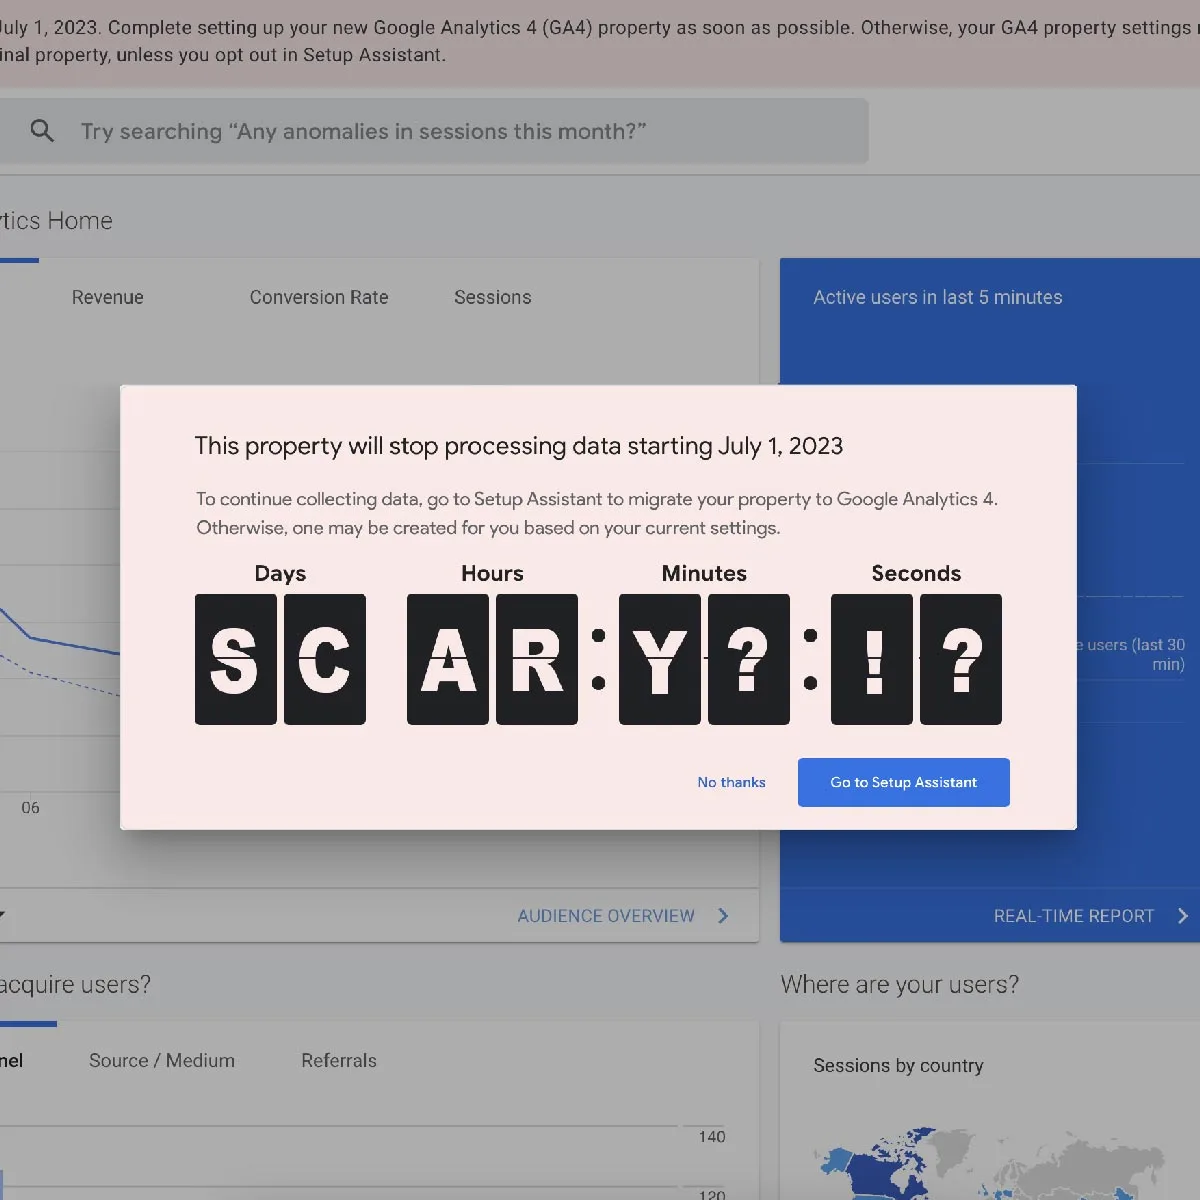 Google Analytics Countdown popup with "Scary?!?" written in place of the time.